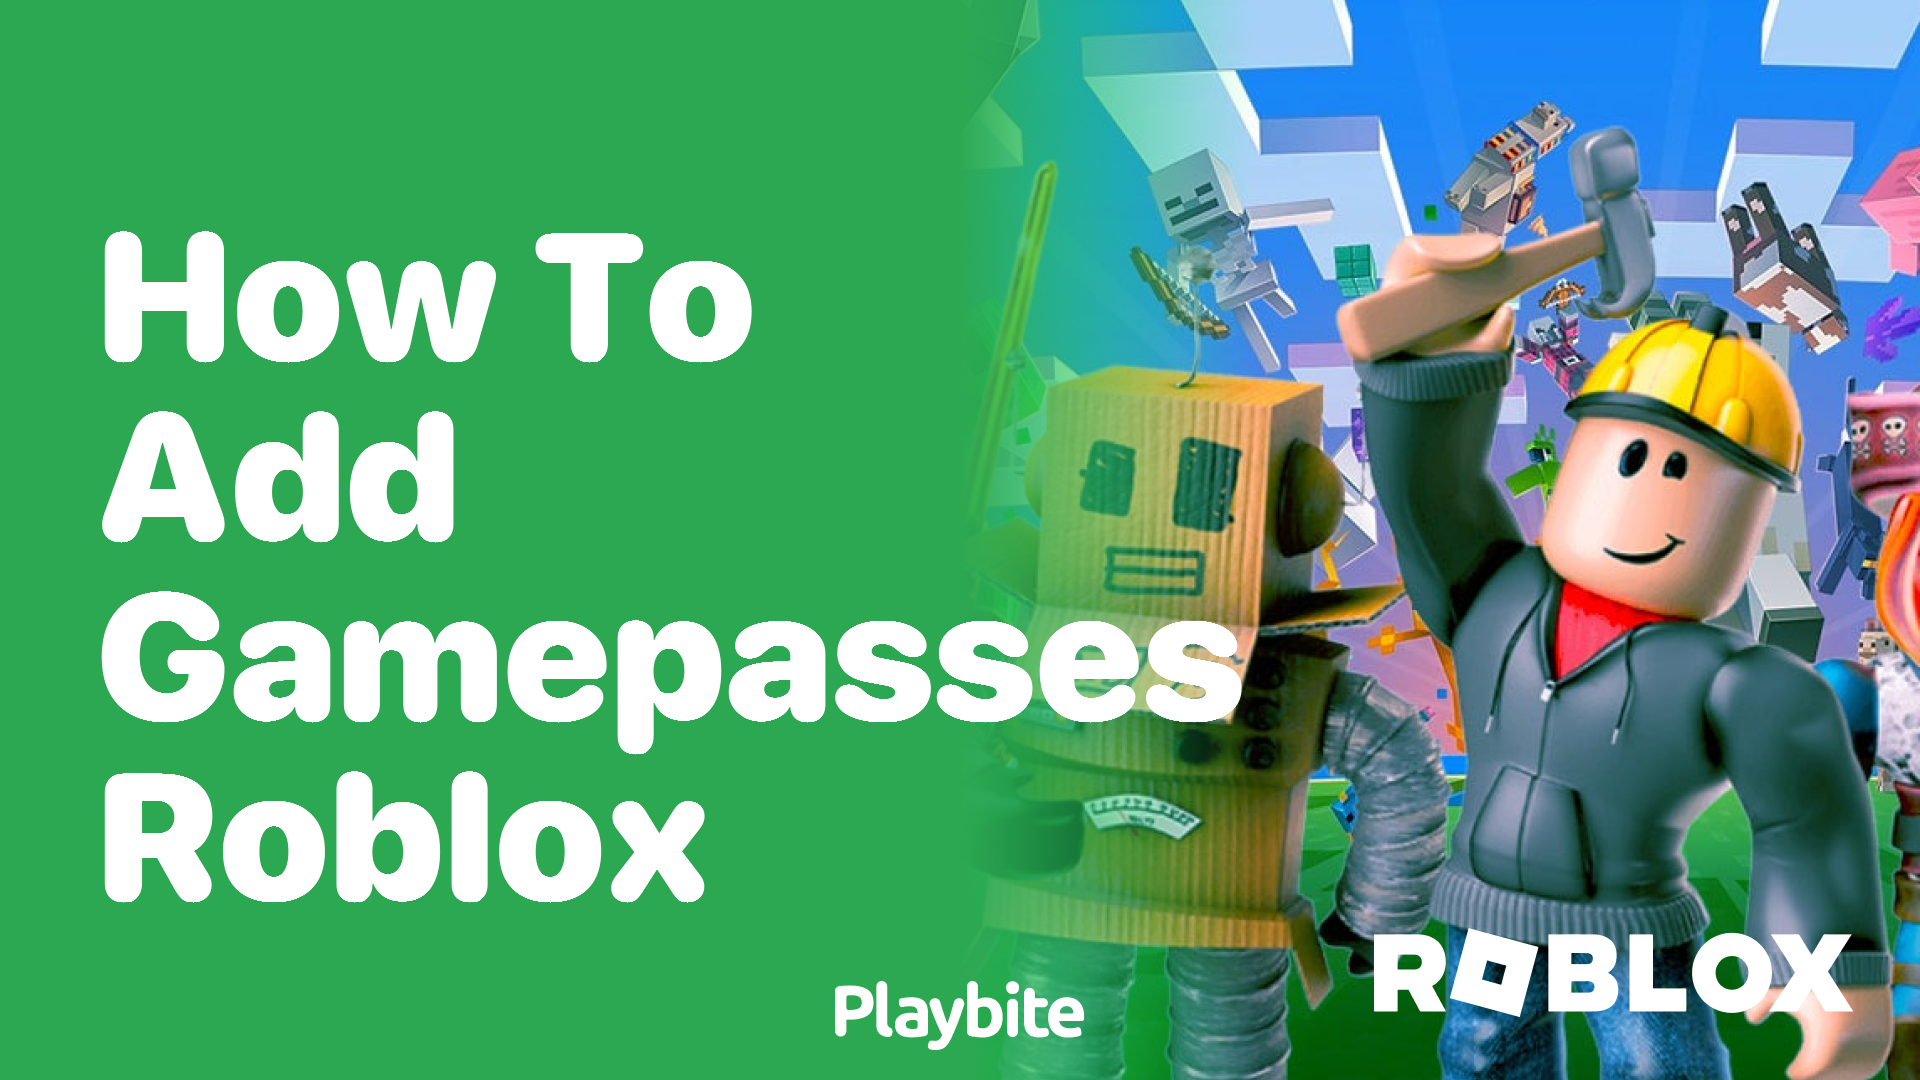 How to Add Gamepasses in Roblox